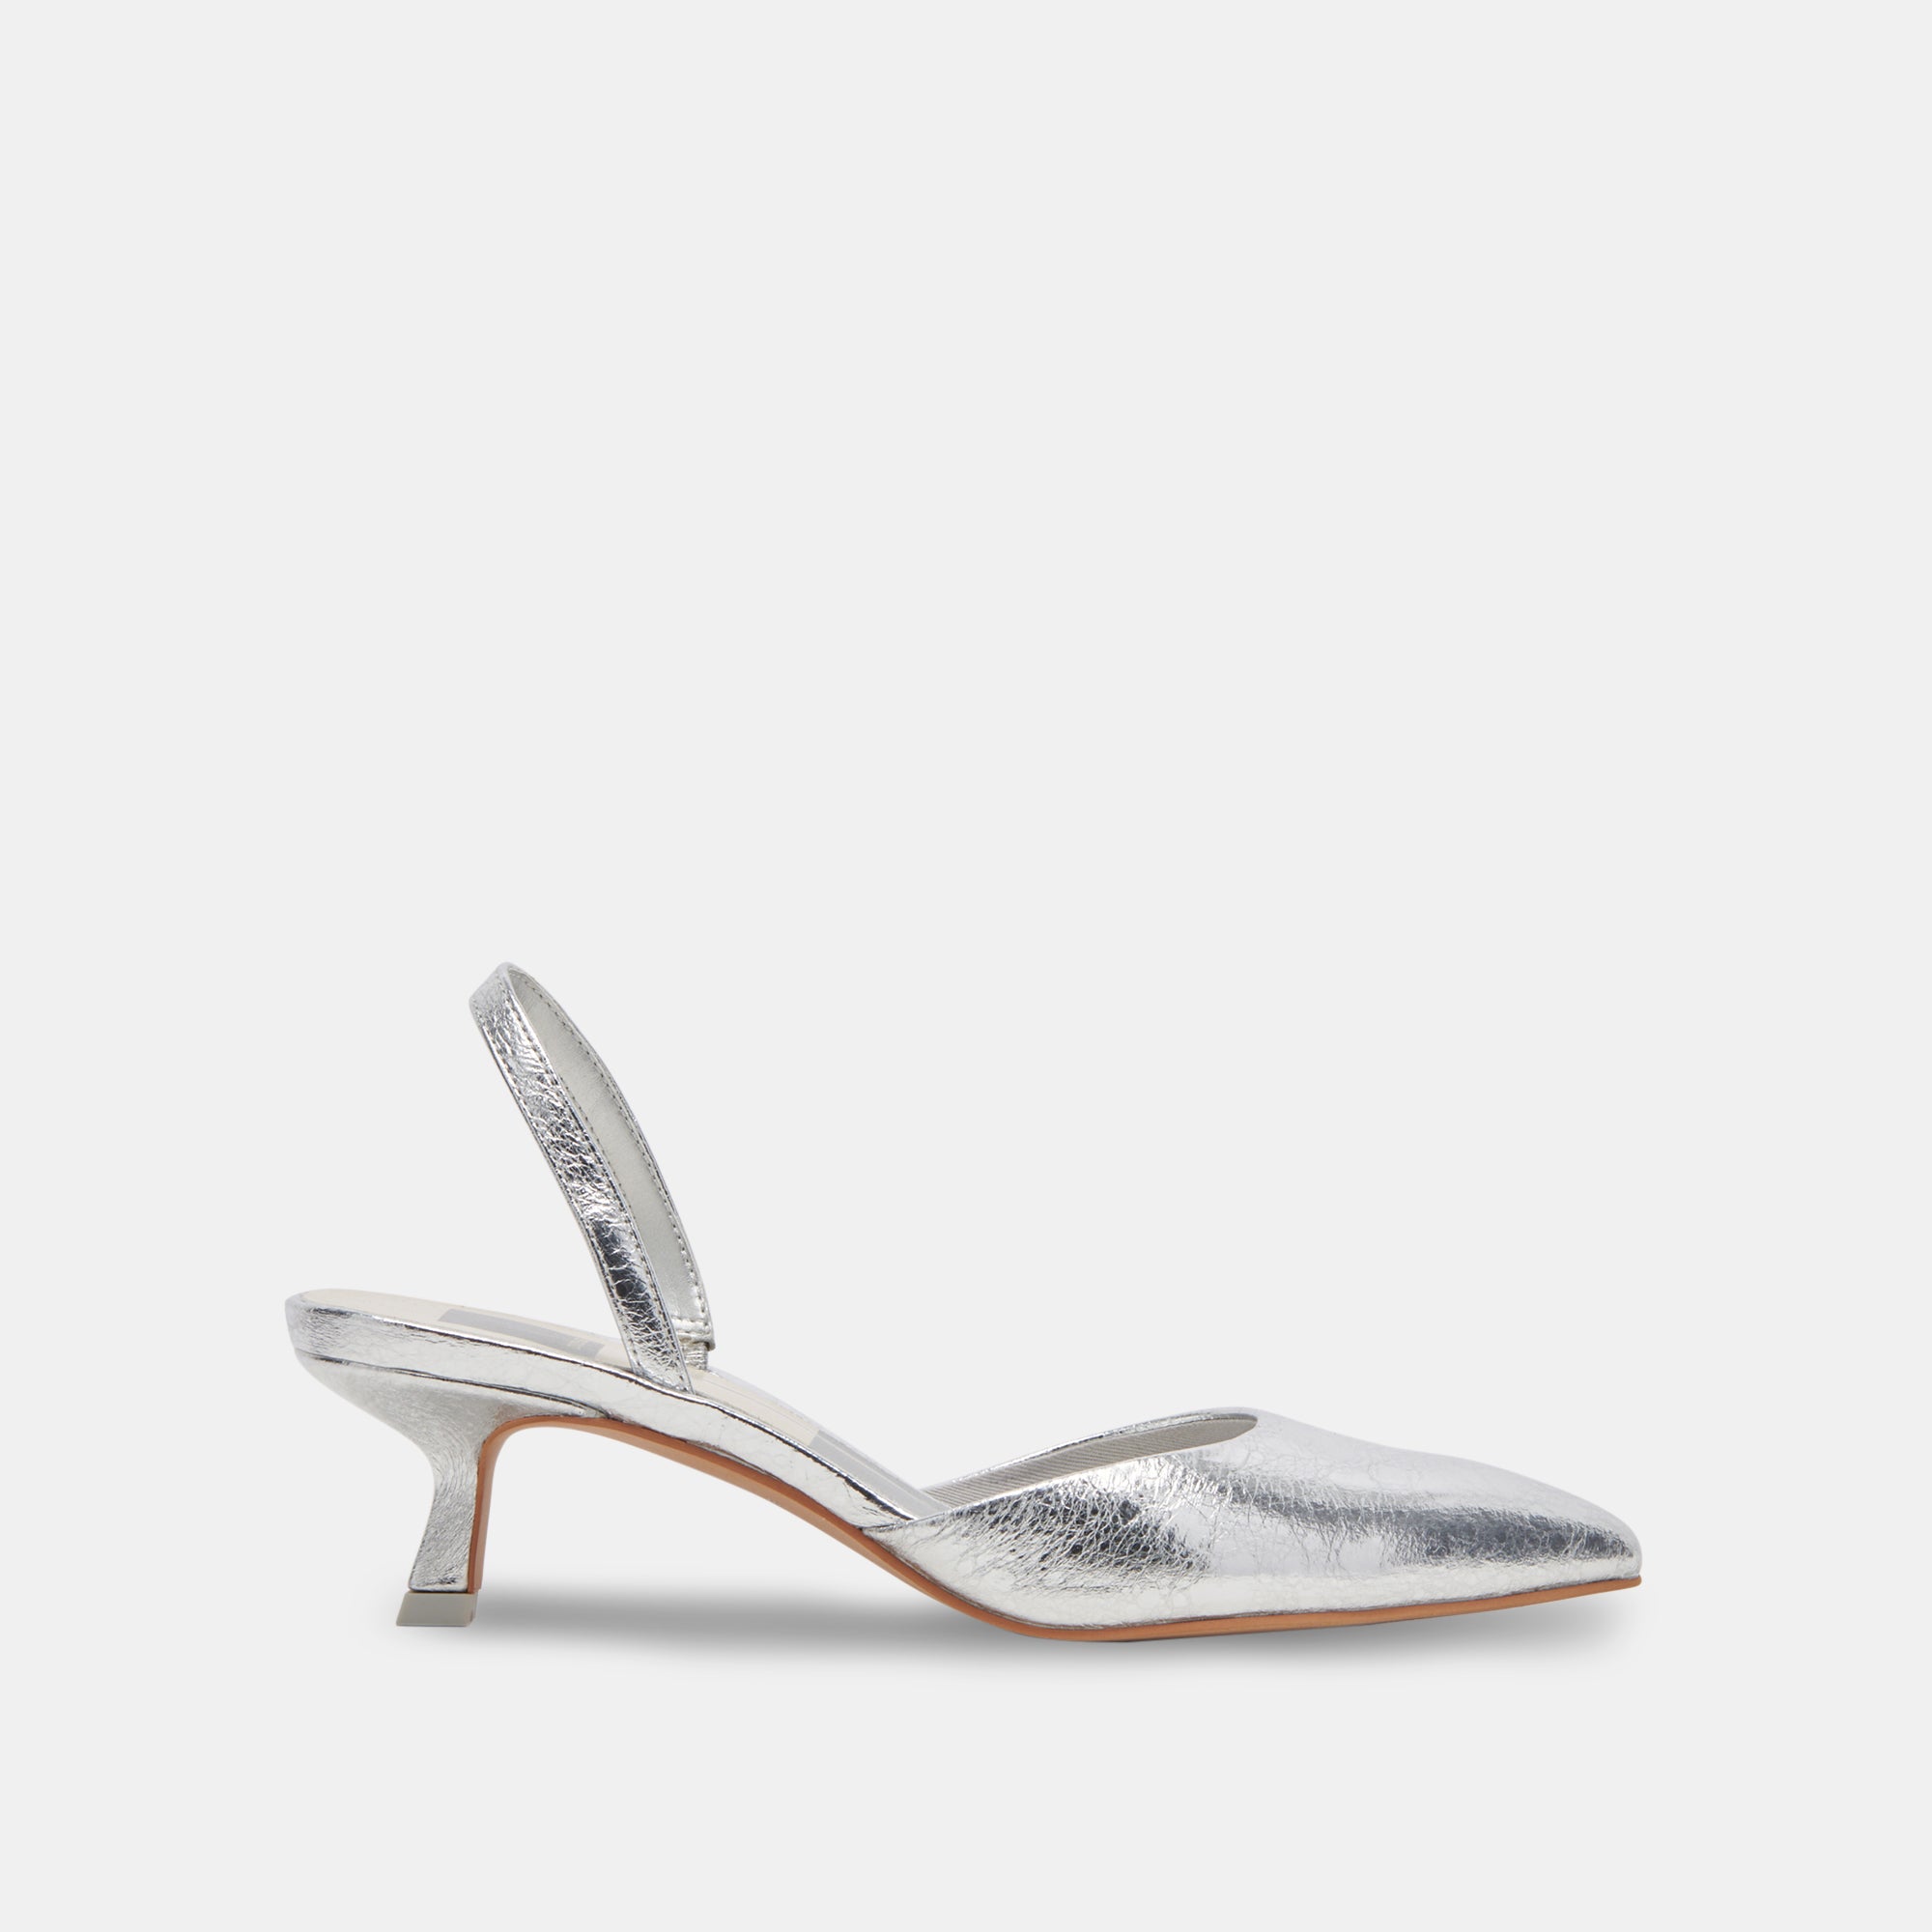 CORSA HEELS SILVER CRACKLED LEATHER